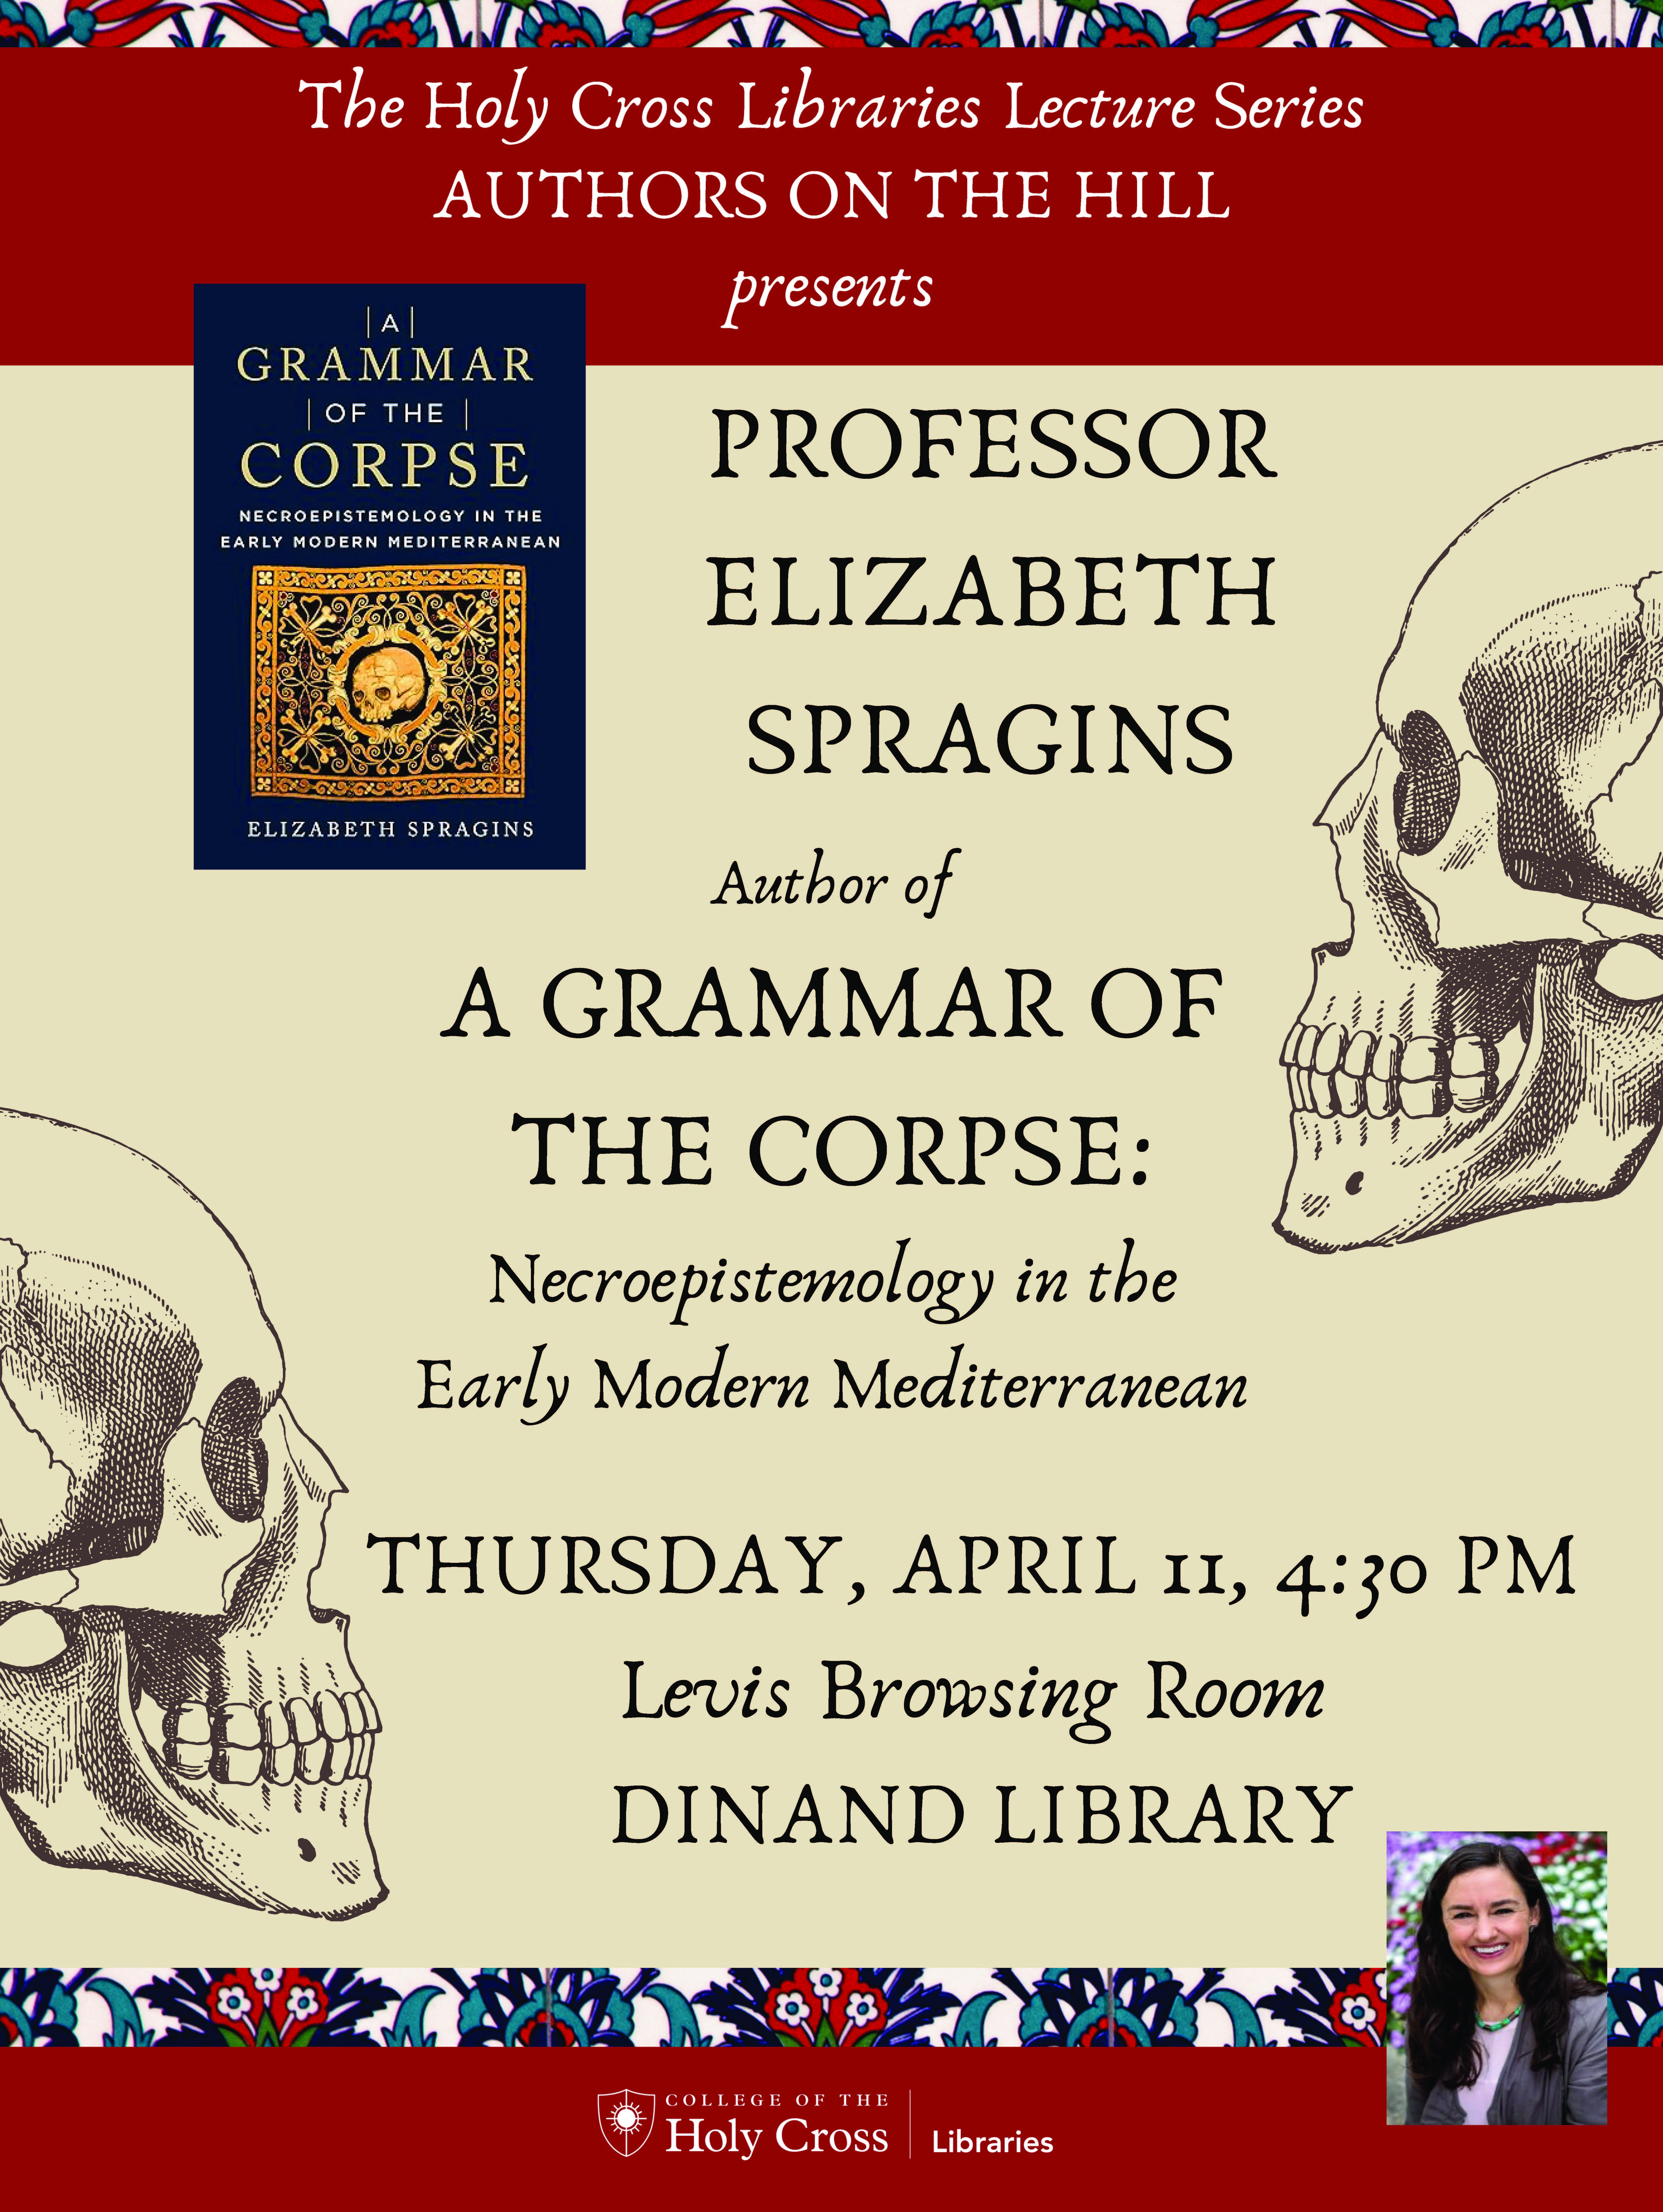 Professor Elizabeth Spragins, Author of A Grammar of The Corpse:  Necroepistemology in the Early Modern Mediterranean, Thursday, April 11, 4:30 pm, Levis Browsing Room, Dinand Library